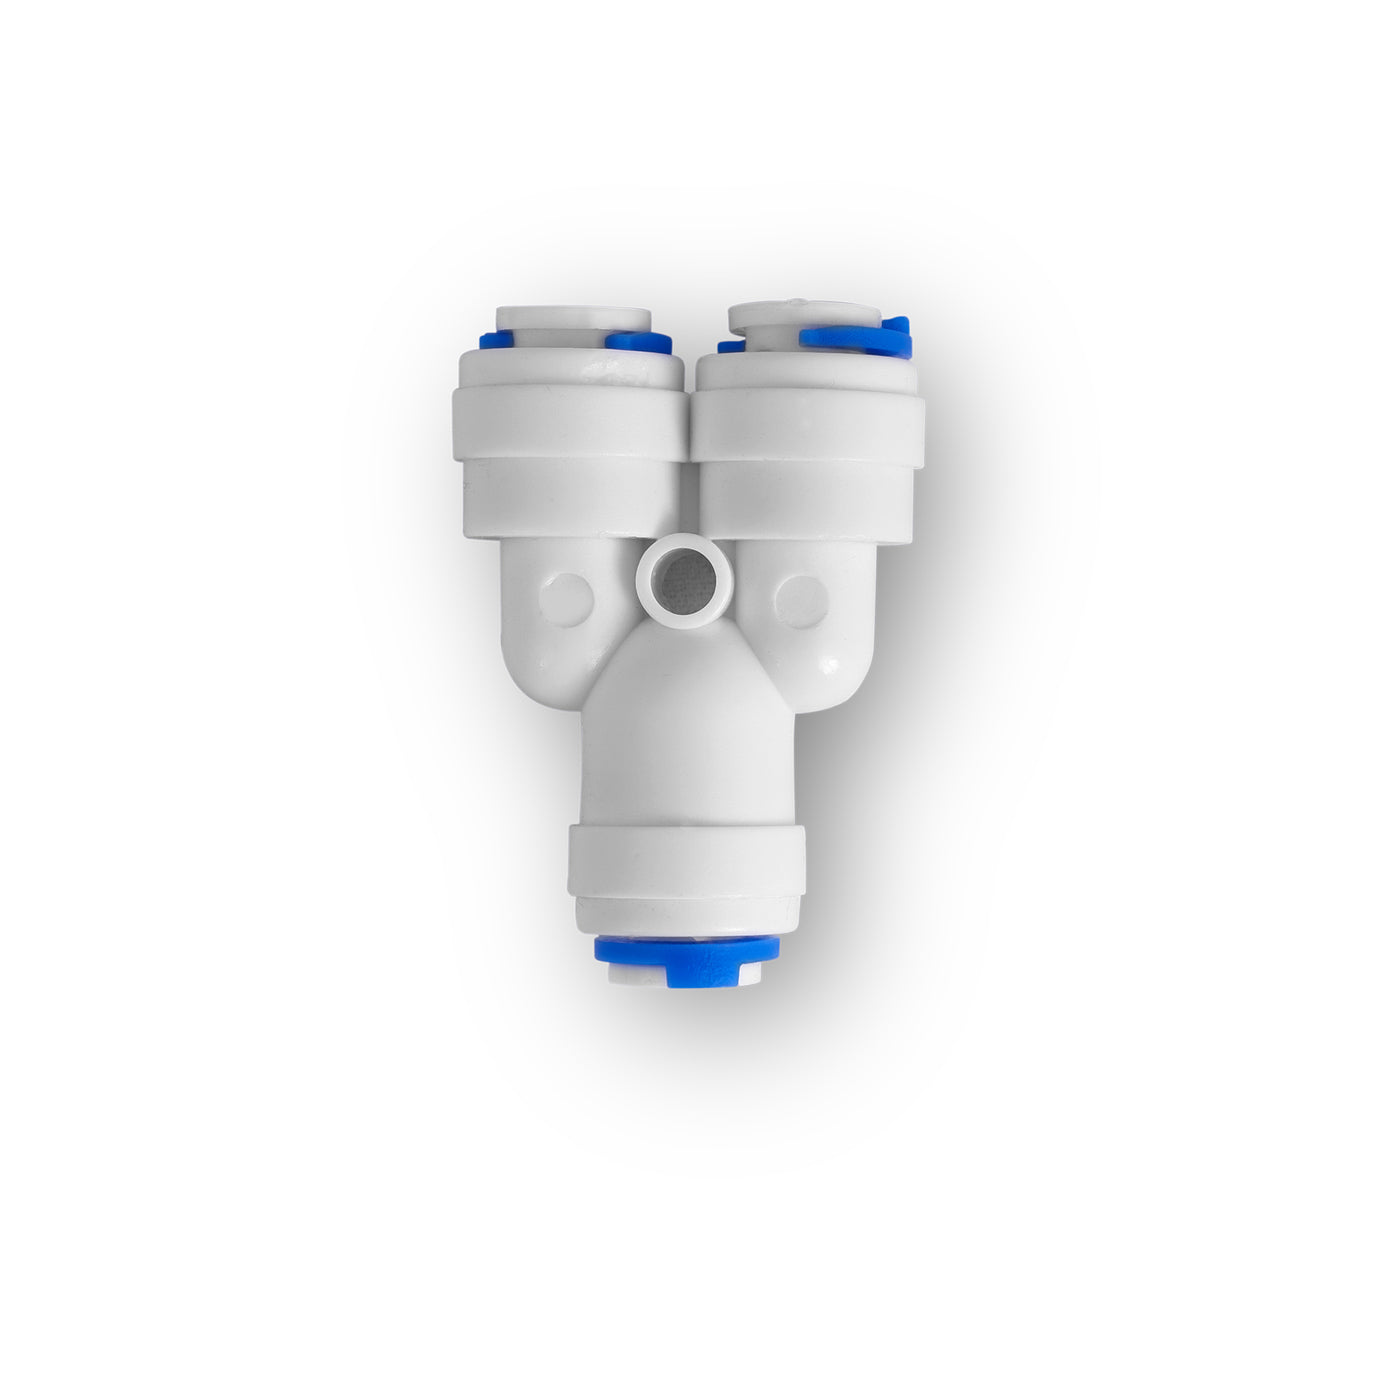 1/4” Quick Connect Push in Fittings RO & Water Systems